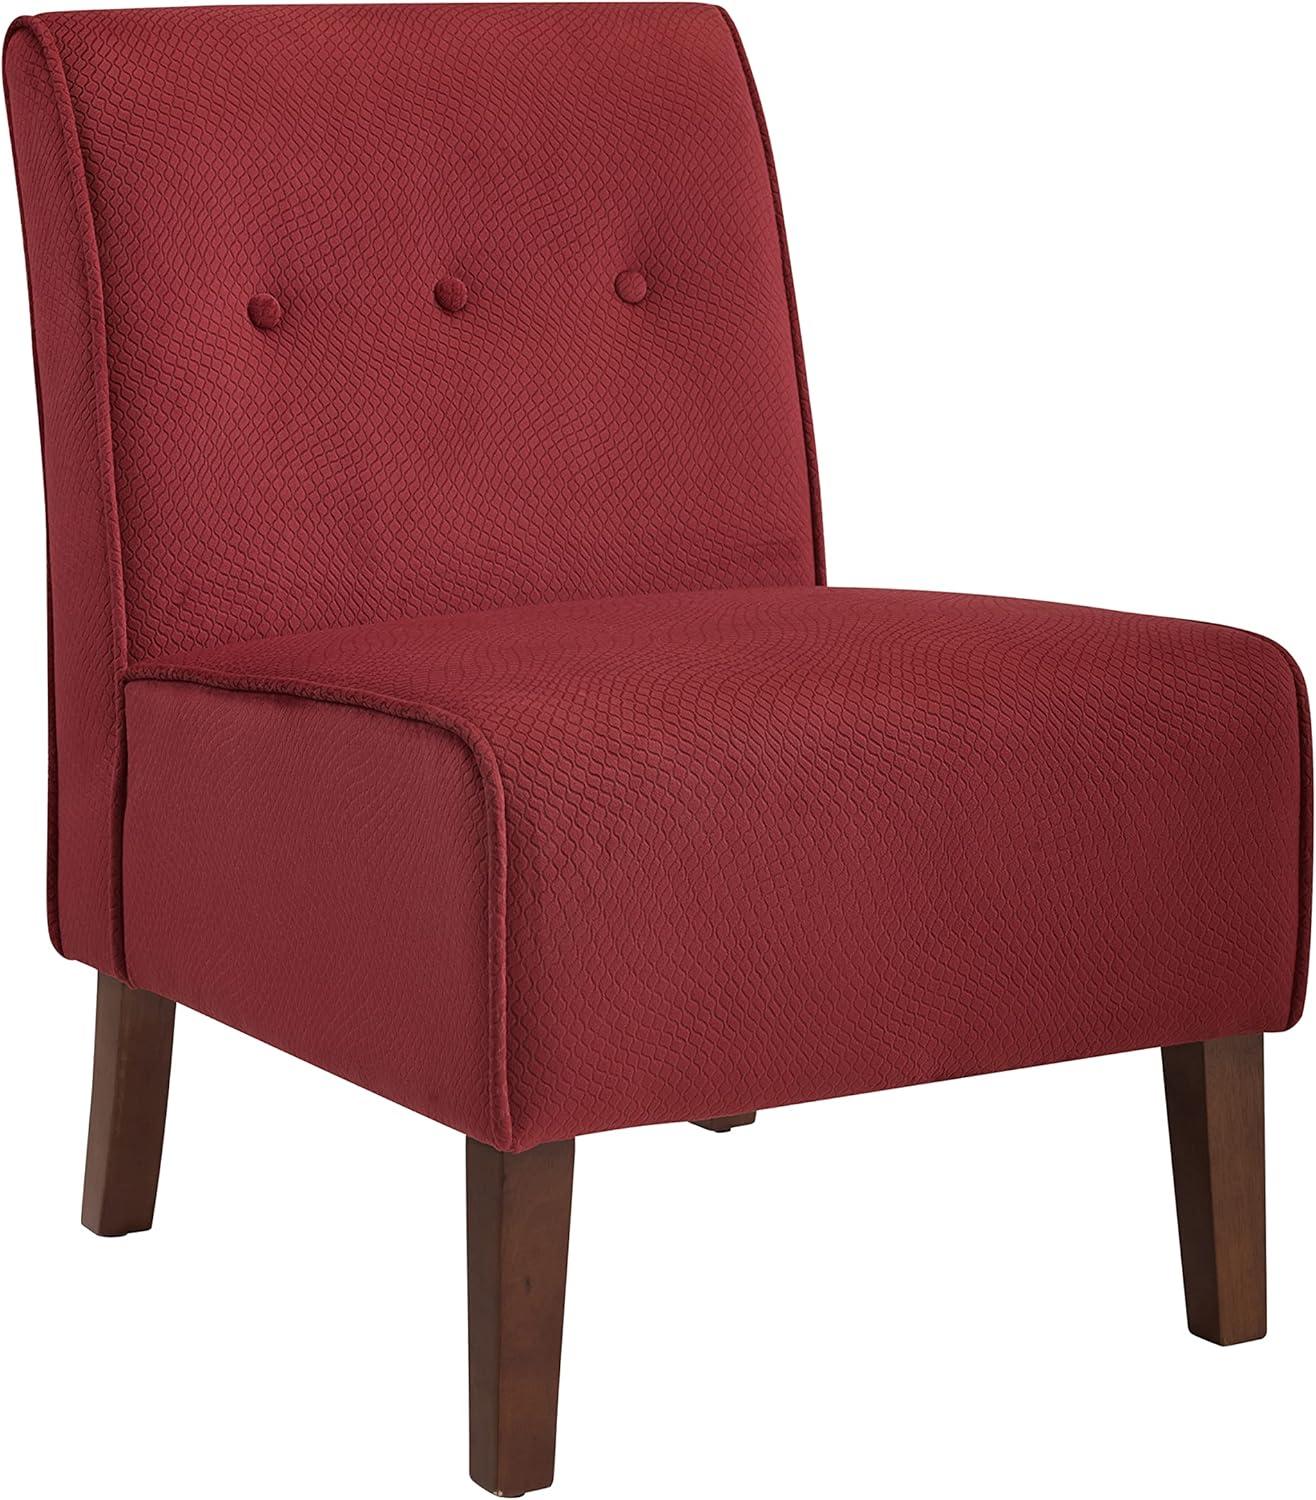 Elegant Coco Slipper Accent Chair in Luxurious Red with Sturdy Wood Frame